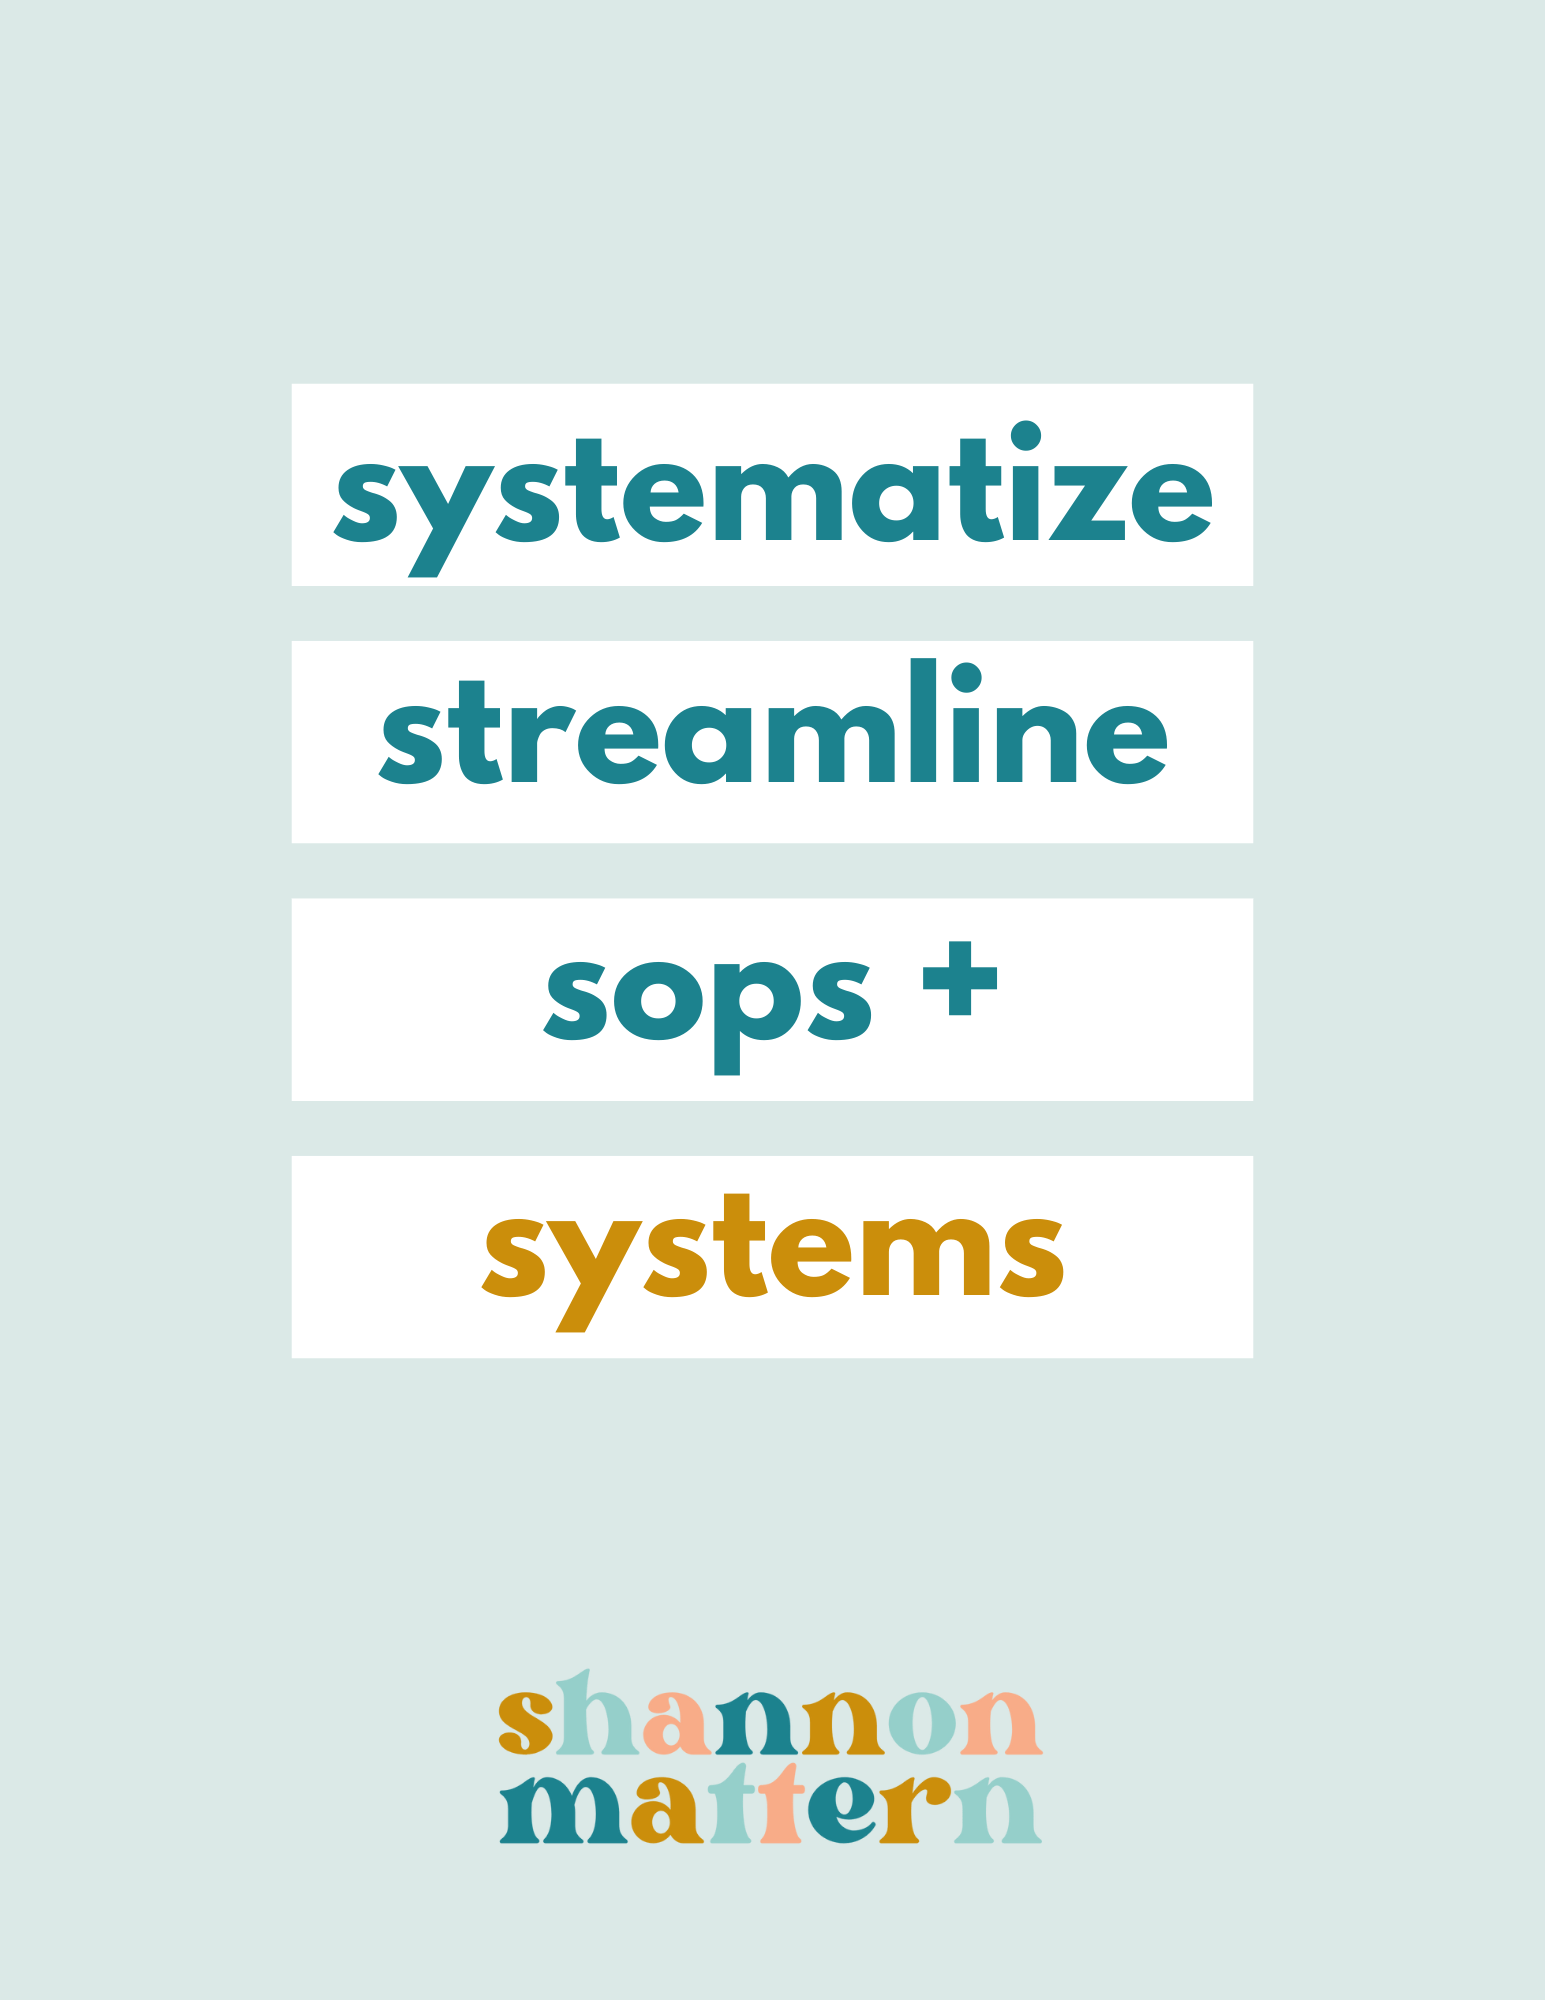 In this image, Shannon Mattern is helping to organize and simplify processes and systems. Full Text: systematize streamline sops + systems shannon mattern